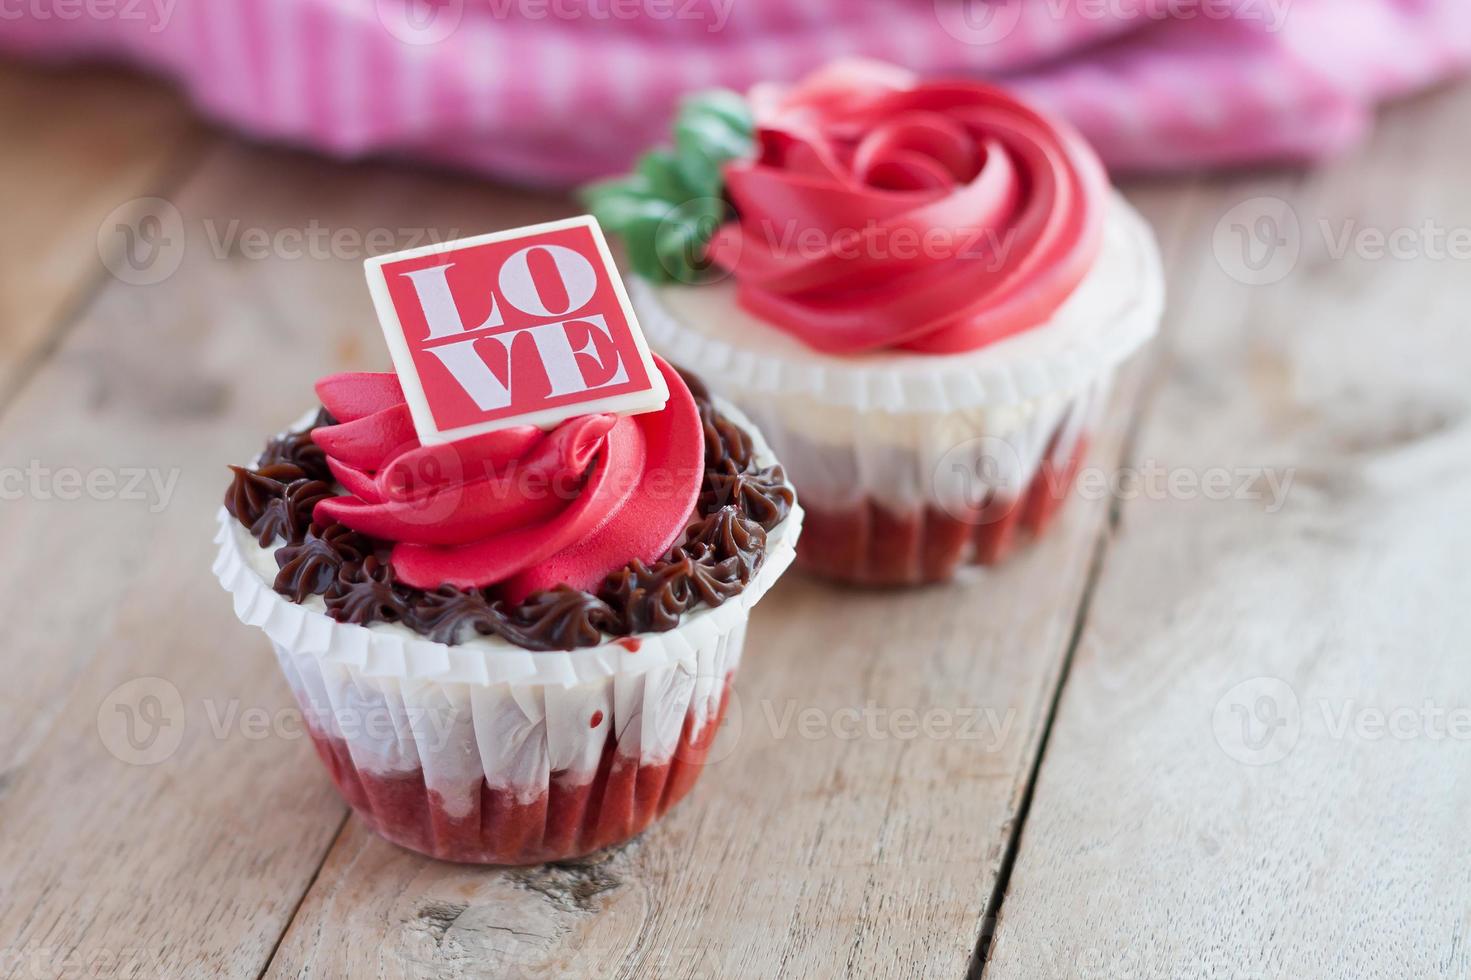 red rose cupcakes on wooden table photo